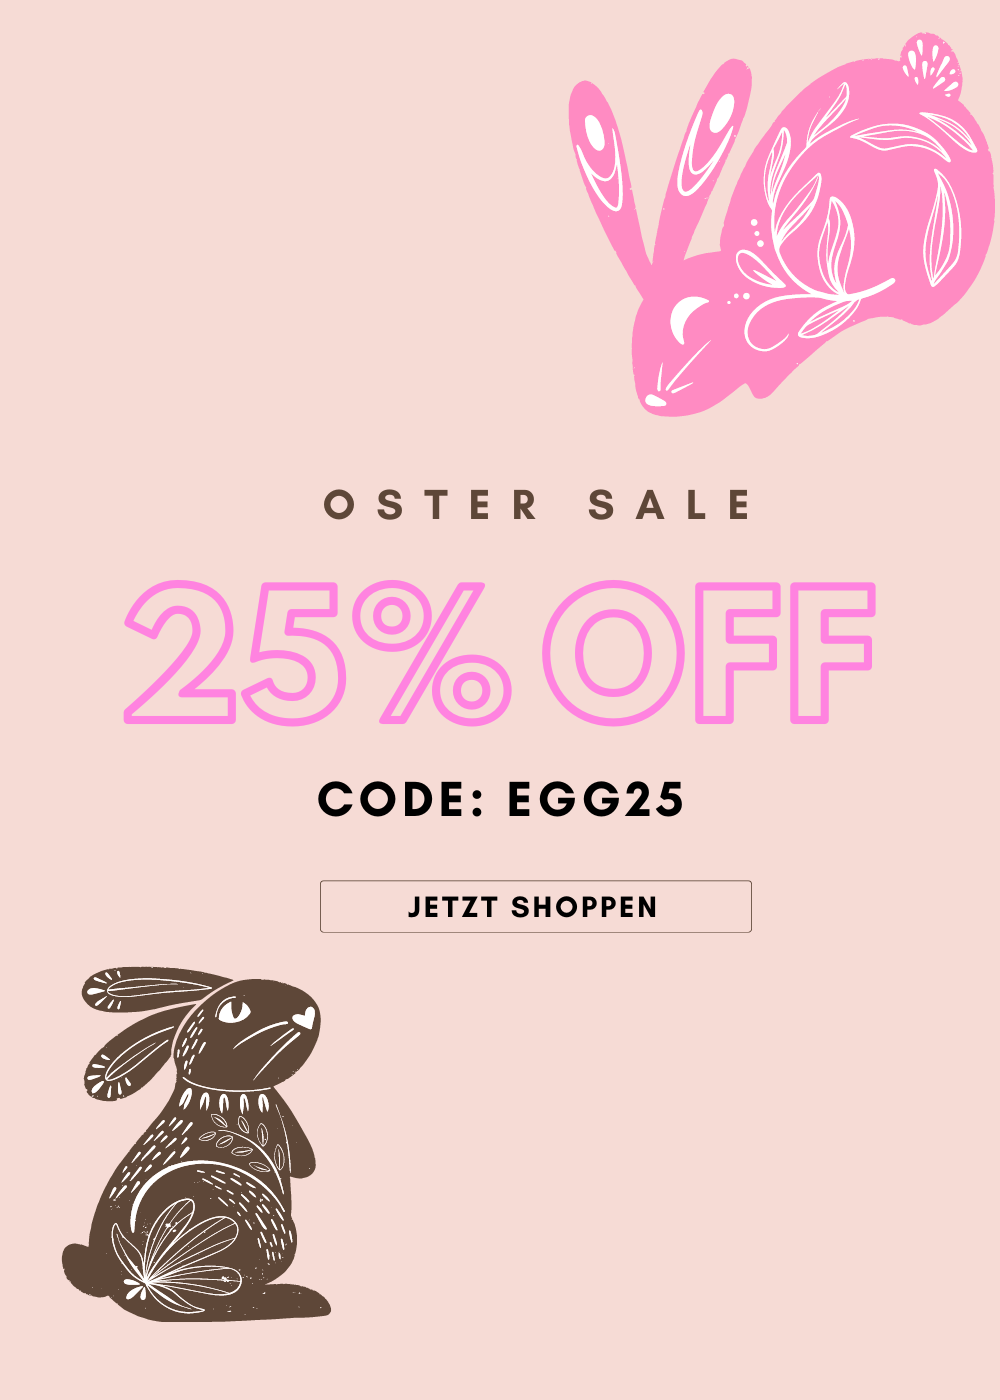 Oster Sale mit Code EGG25